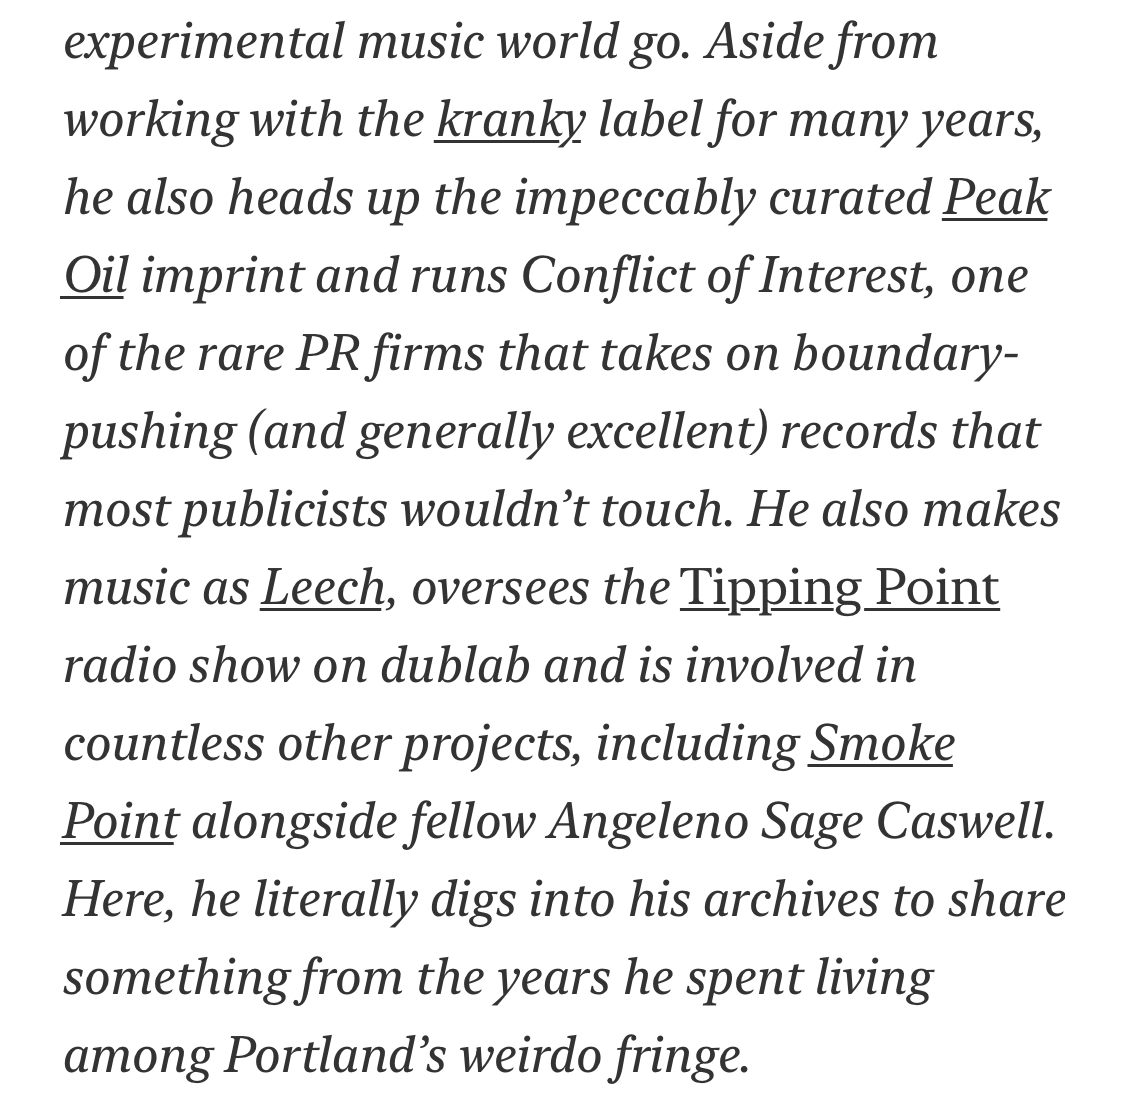 Delighted to have @askyourpillow making a guest recommendation in today's newsletter. Between his work with Peak Oil, @krankyltd and many, many other projects, Brian is one of those behind-the-scenes heroes who quietly helps people and makes experimental music happen.